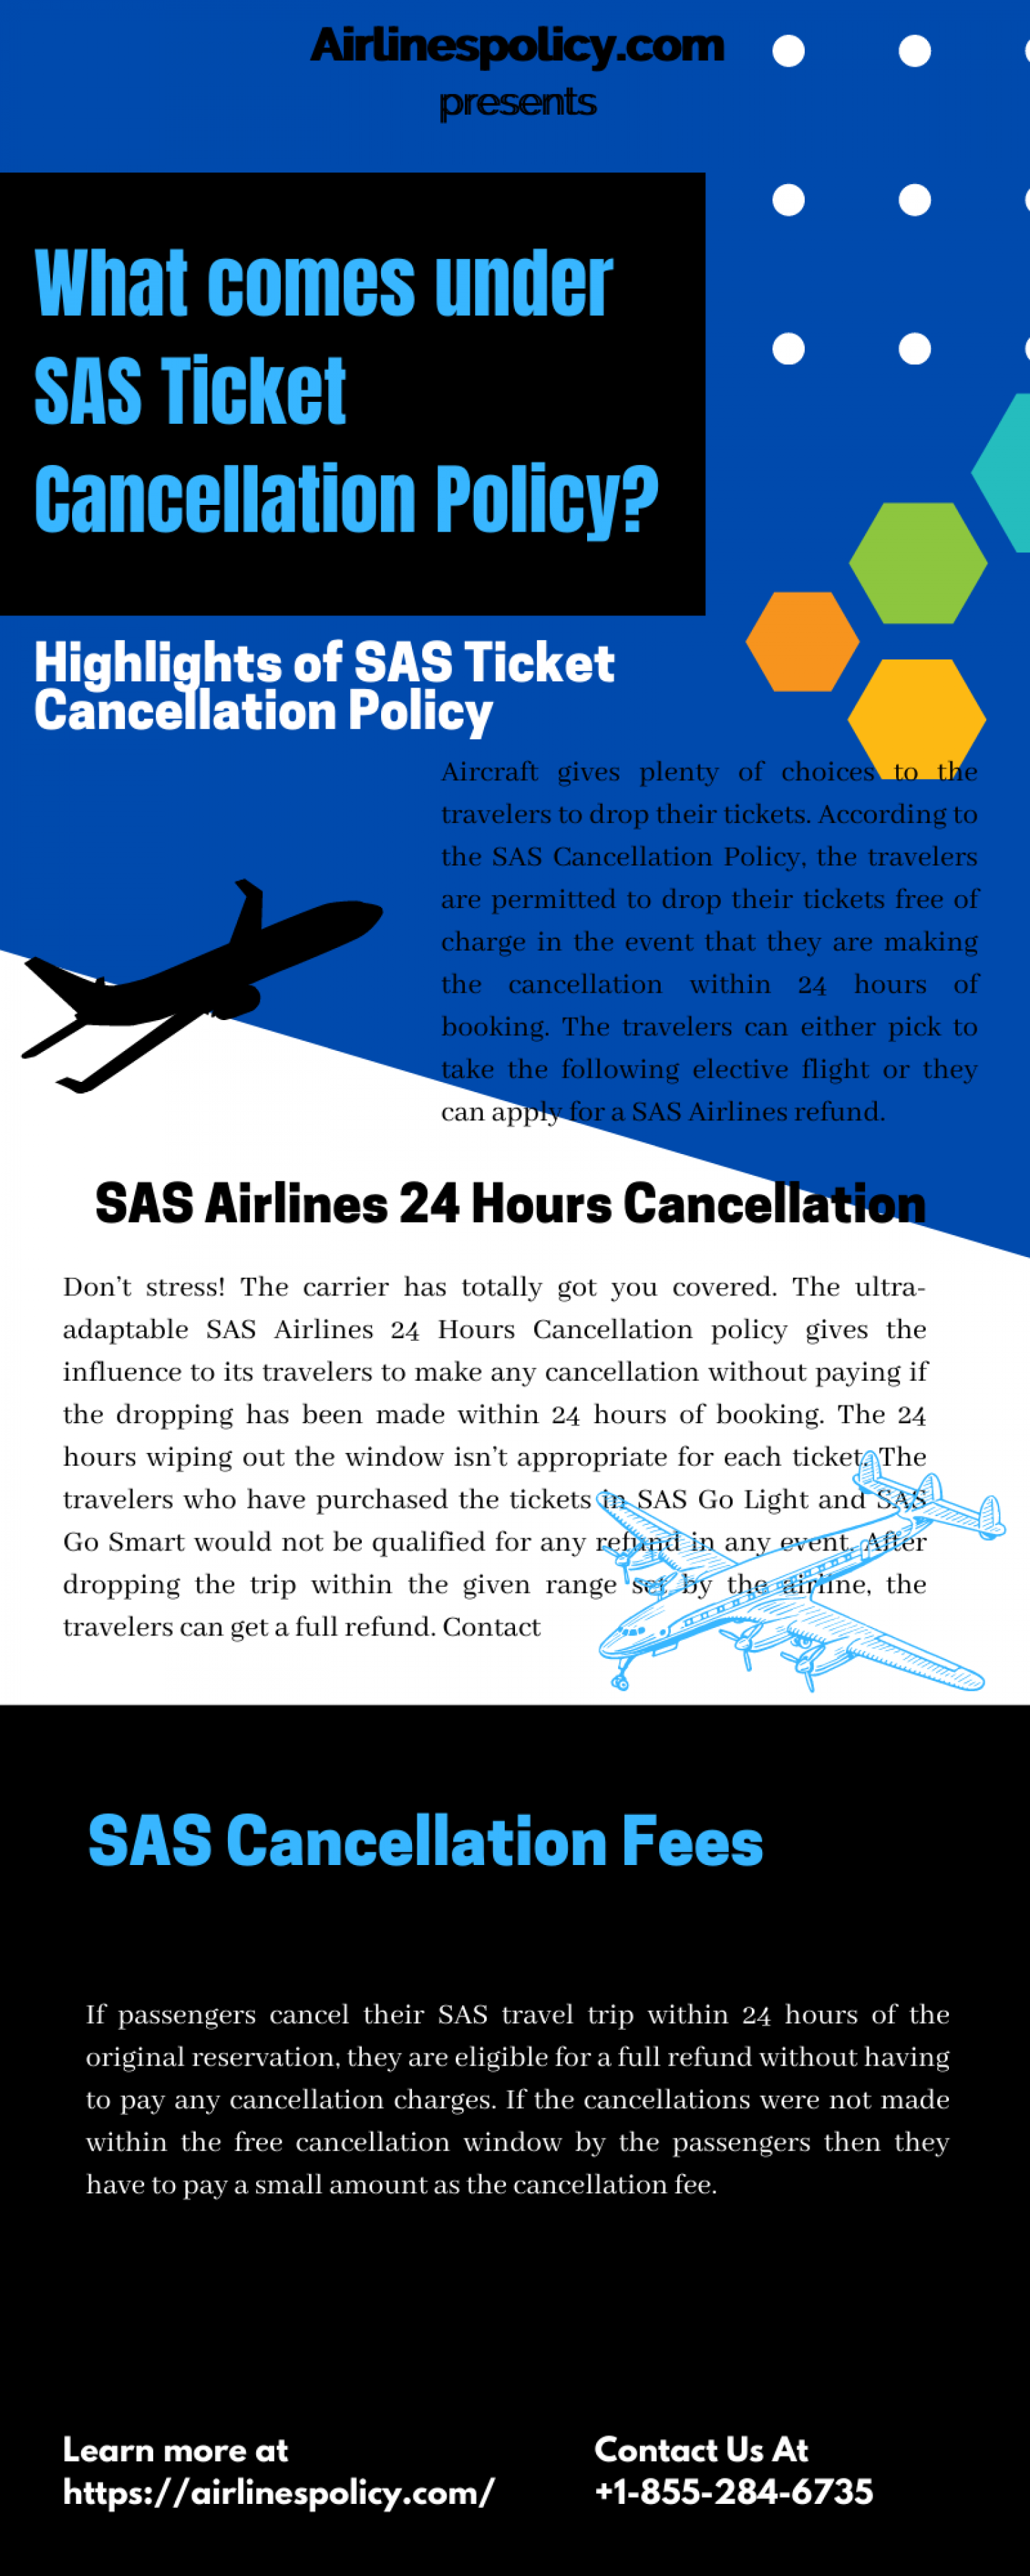 Information about SAS Cancellation Fees Infographic